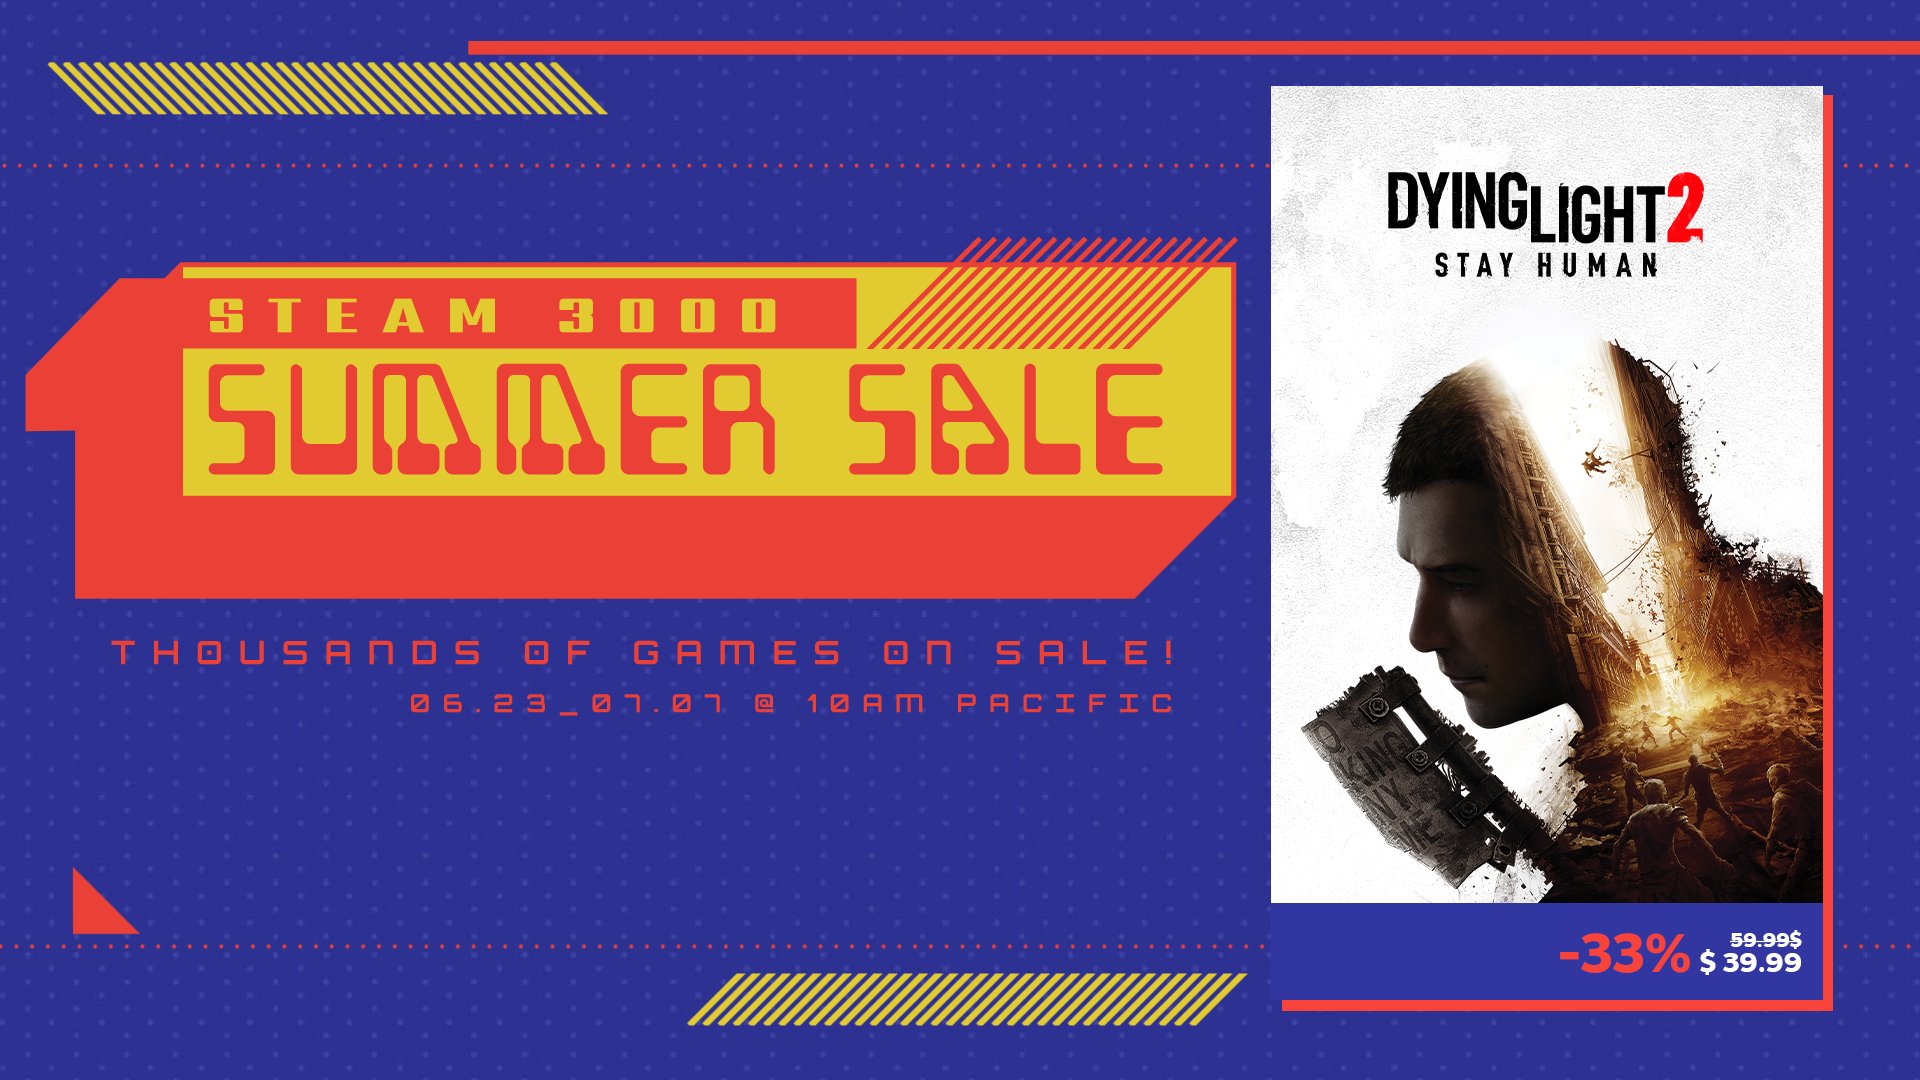 Hensigt bøf Tilgængelig Dying Light on Twitter: "It's time - @Steam Summer Sale is here... and so  are we! You can grab Dying Light 2 with great discounts of up to -33%!  https://t.co/RD6VLkaSX7" / Twitter